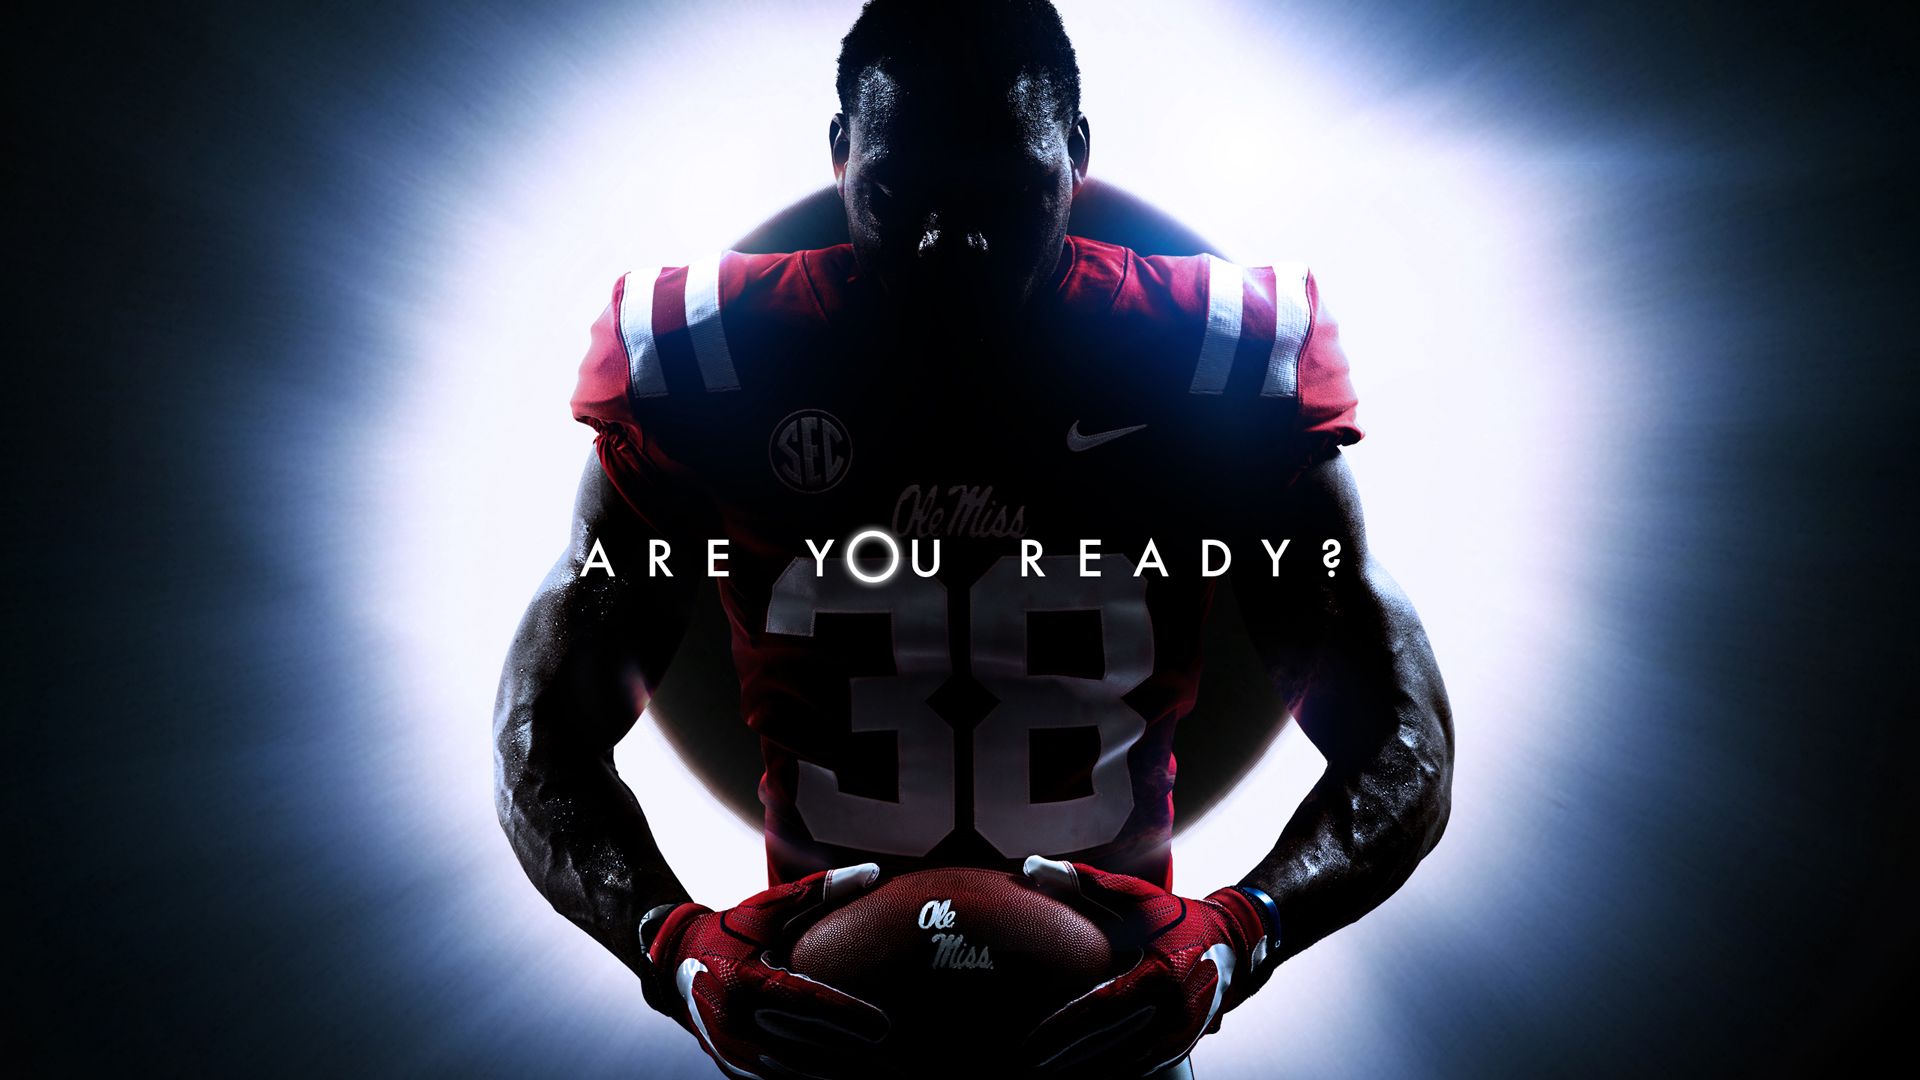 Ole Miss Wallpaper Free Ole Miss Background